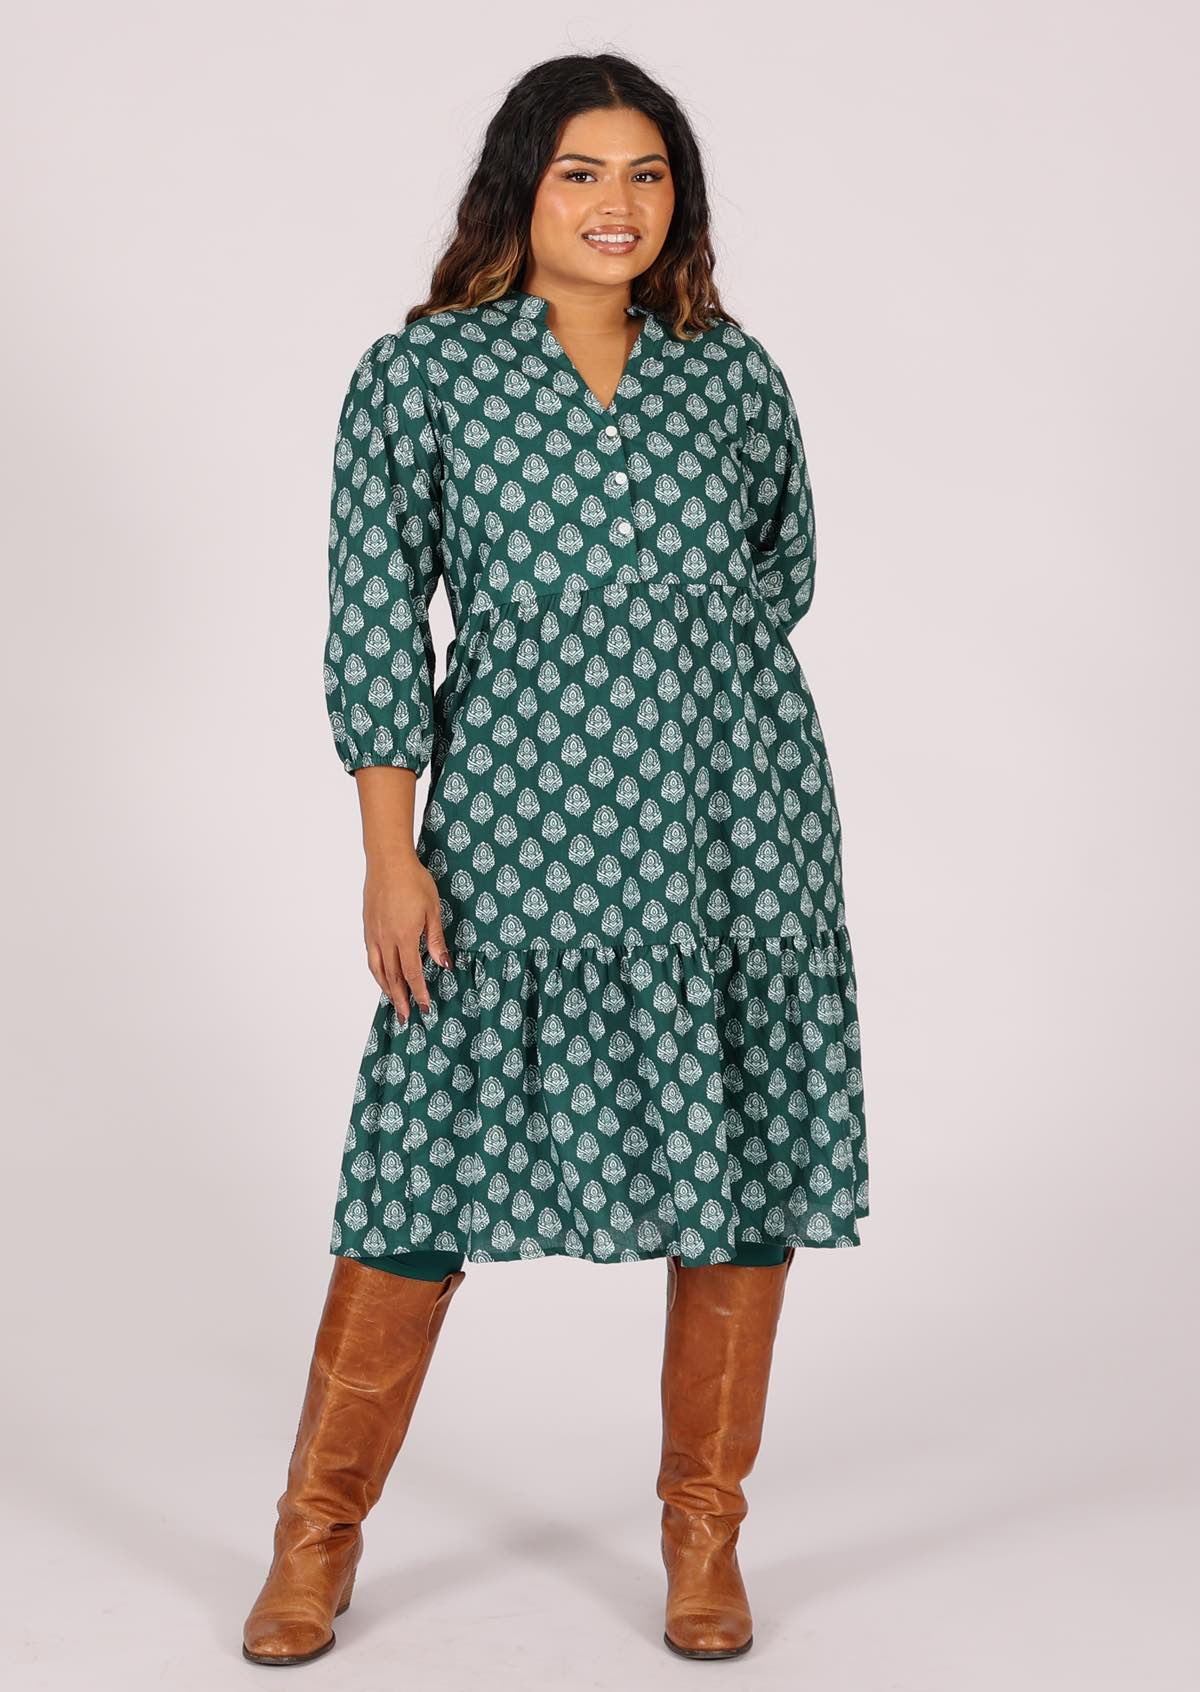 100% cotton dark green tiered midi dress with 3/4 sleeves